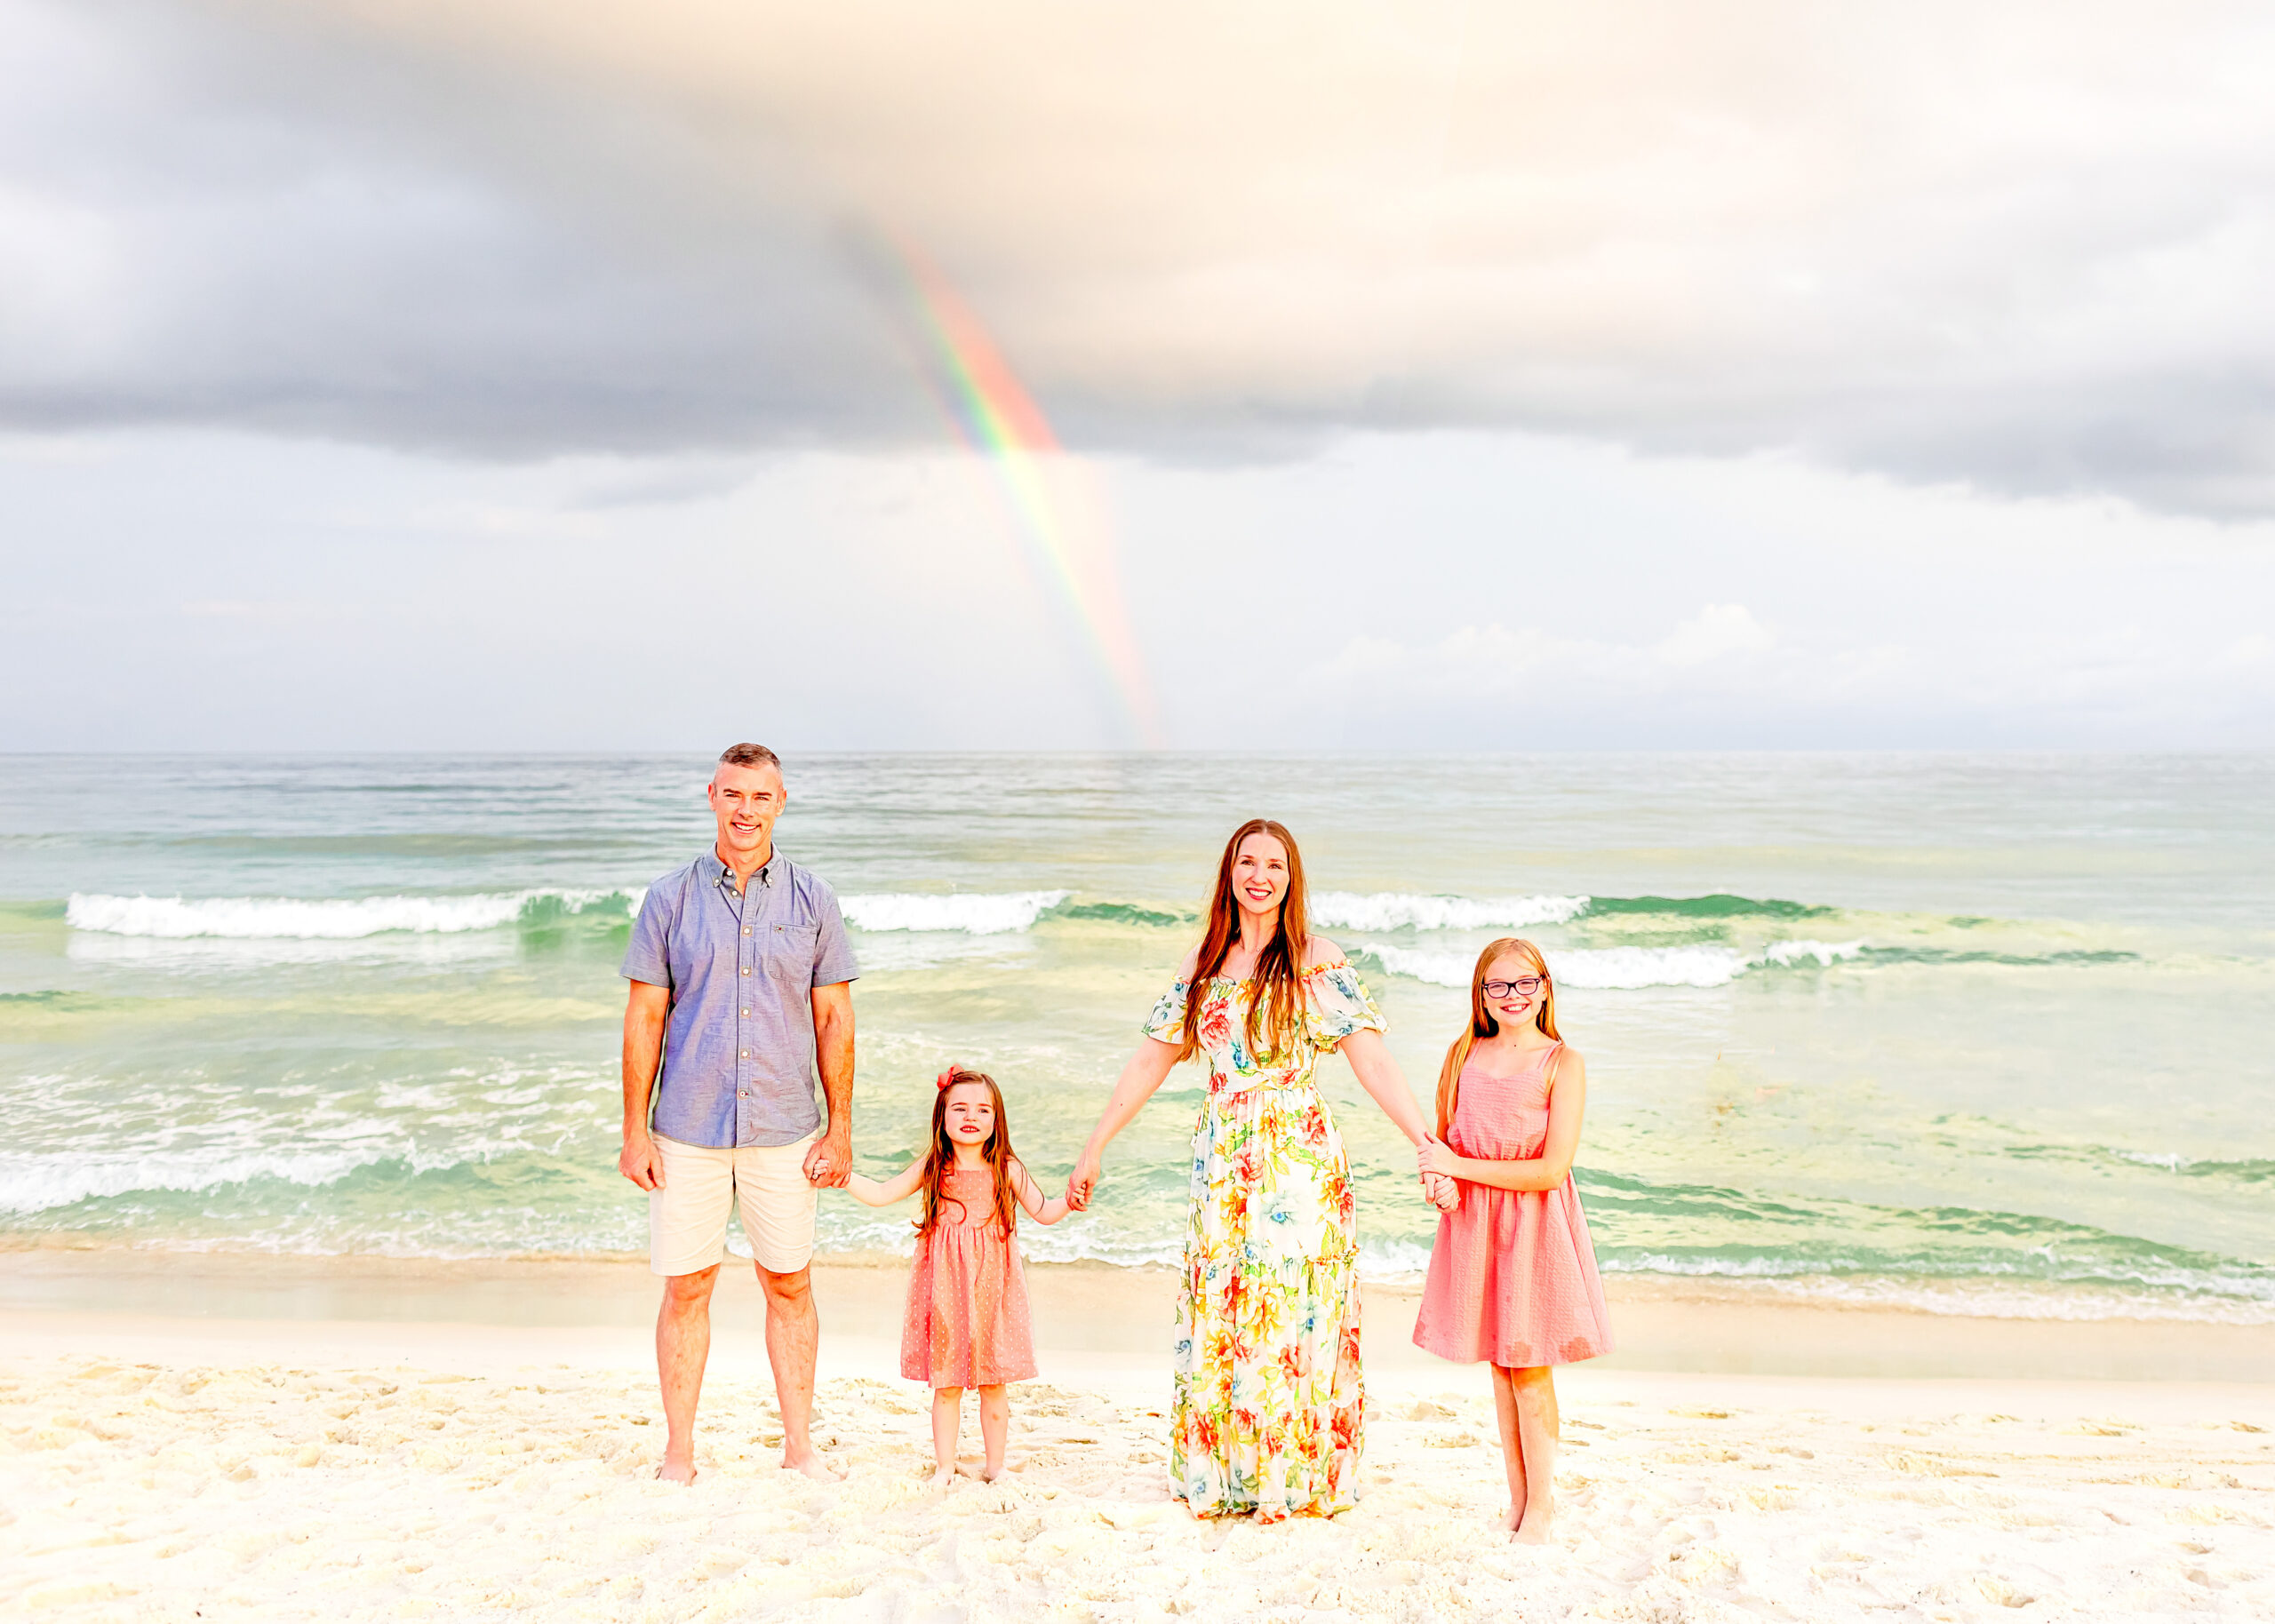 Epic family captured on the beach in front of a rainbow